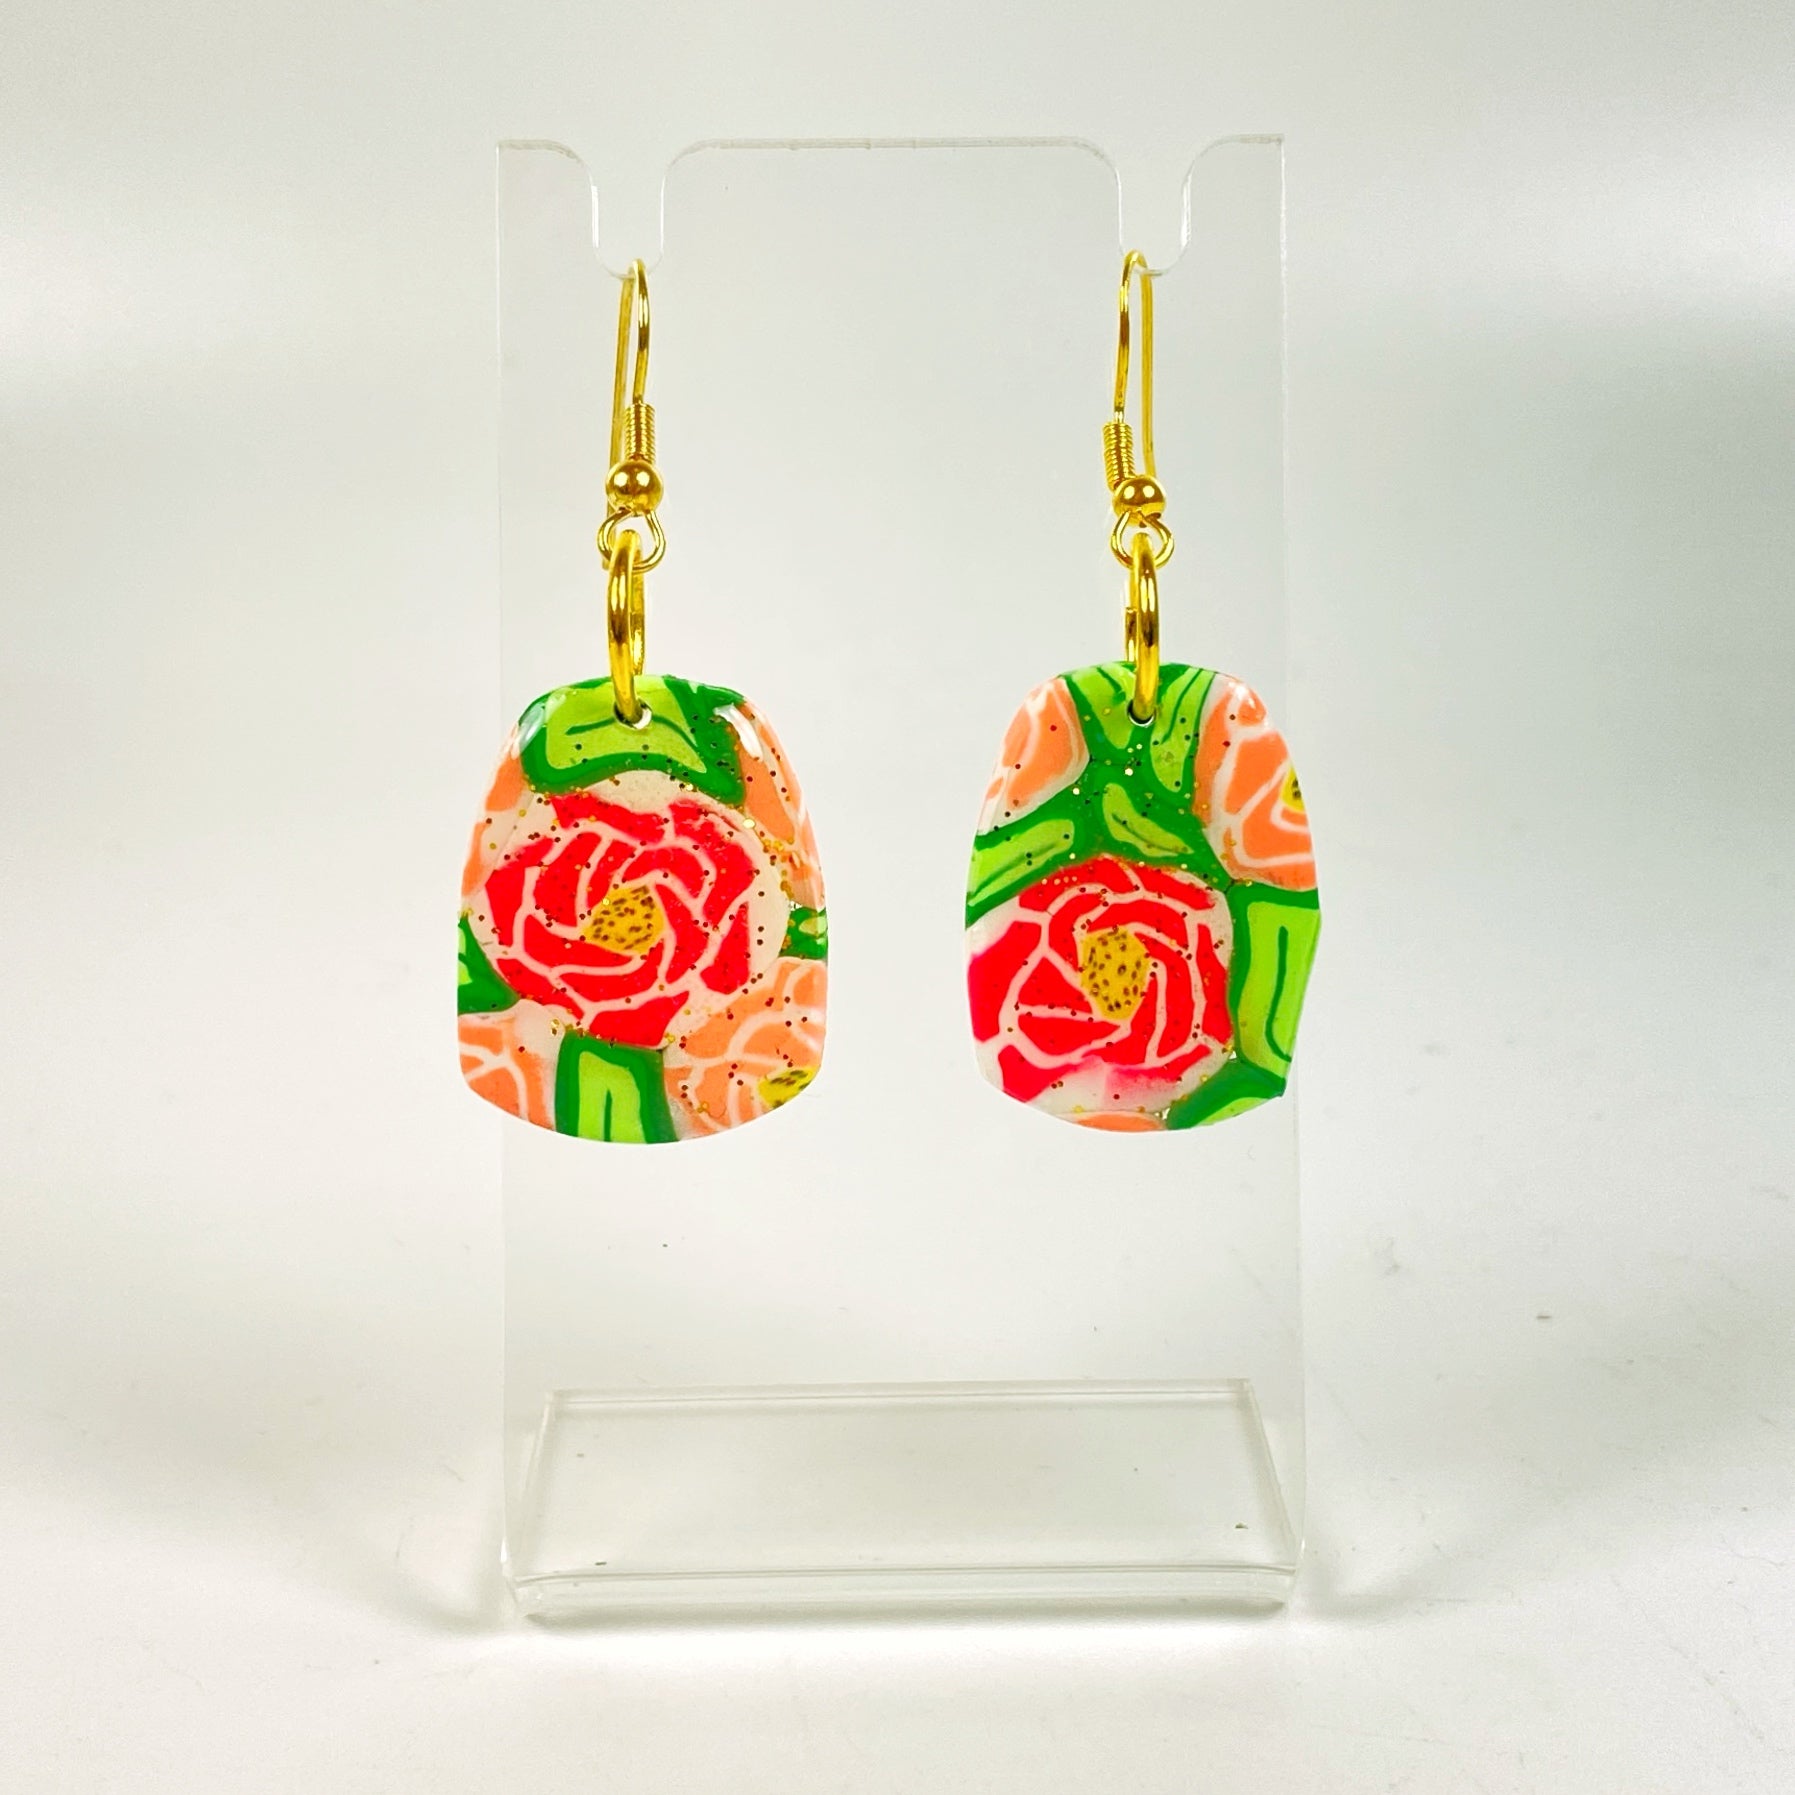 The Roses Handmade Polymer Clay Dangle Earrings on a small acrylic display stand